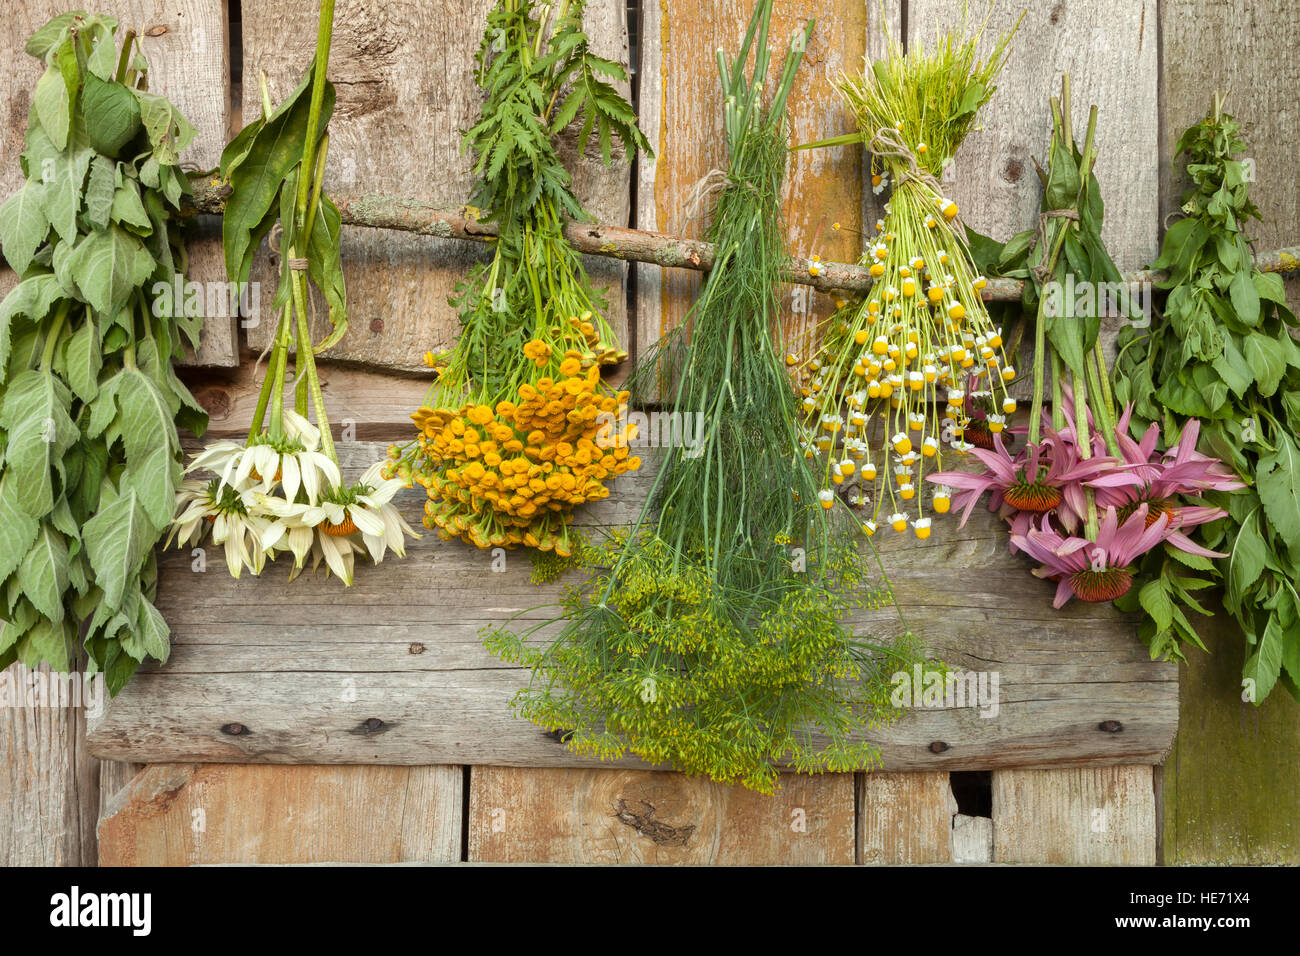 Drying medical herbs in a shadow: echinacea,chamomile,dill,tansy,melissa. Stock Photo